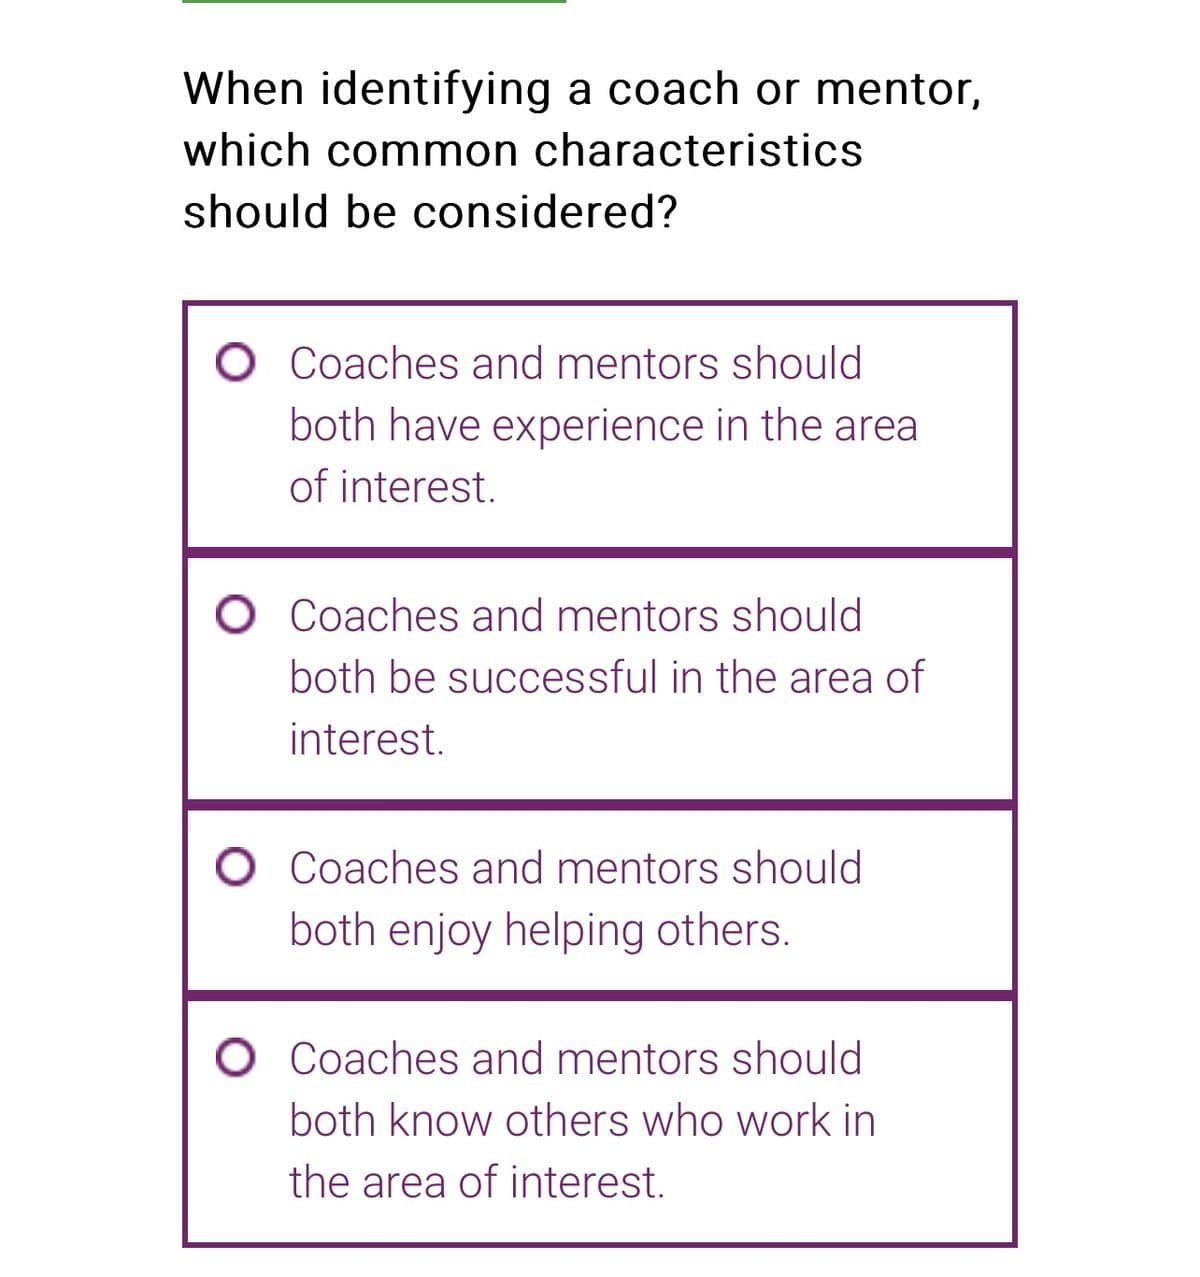 When identifying a coach or mentor,
which common characteristics
should be considered?
O Coaches and mentors should
both have experience in the area
of interest.
O Coaches and mentors should
both be successful in the area of
interest.
O Coaches and mentors should
both enjoy helping others.
O Coaches and mentors should
both know others who work in
the area of interest.